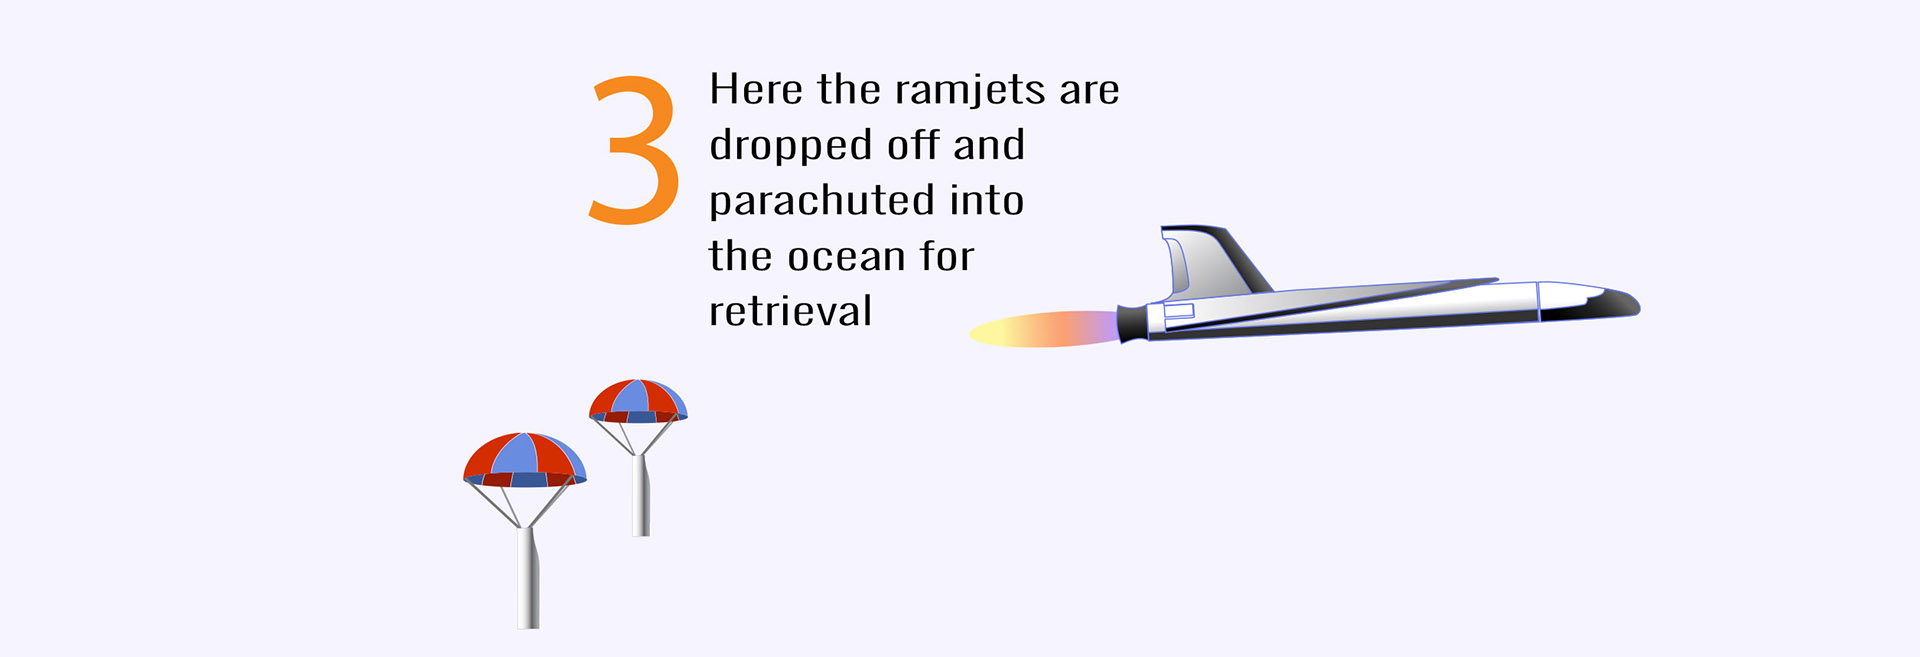 Stage 3 - ramjets jettisoned